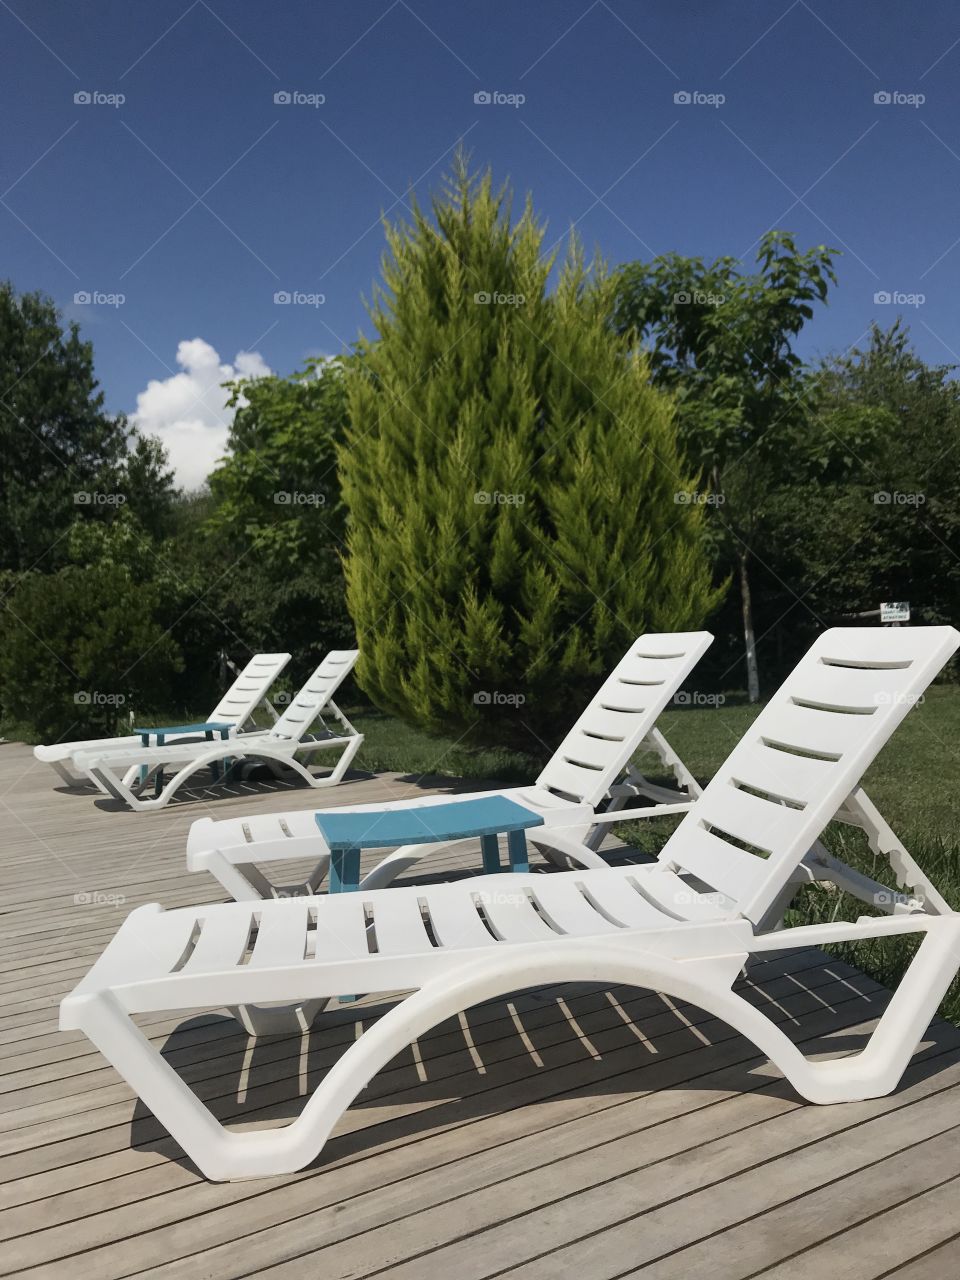 chair for pool in nature